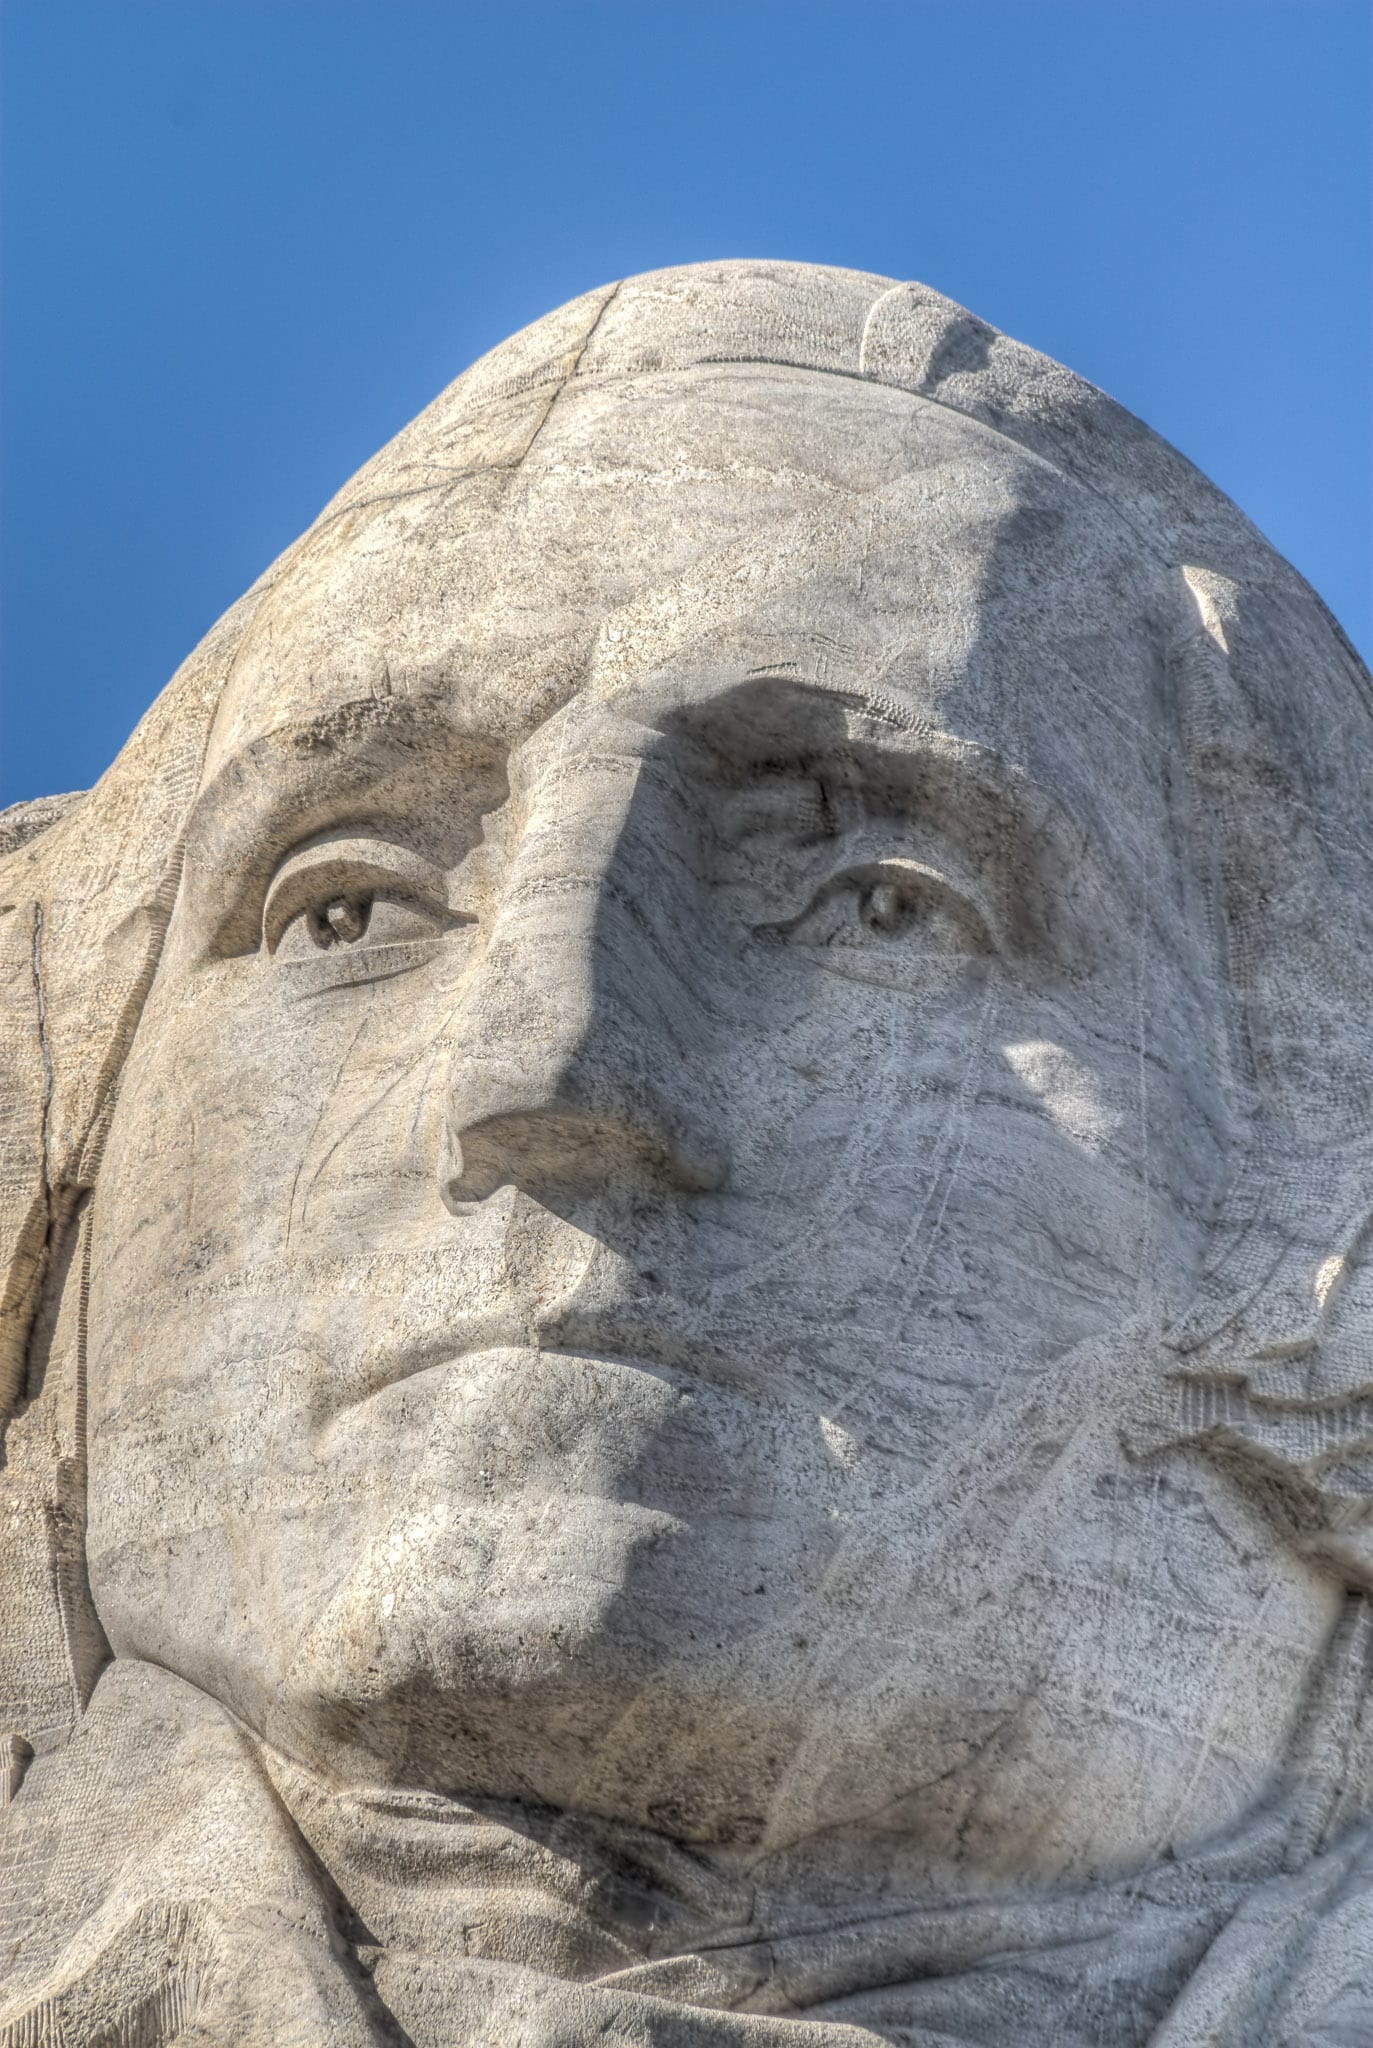 A close-up of the face of President George Washington carved into Mt. Rushmore.